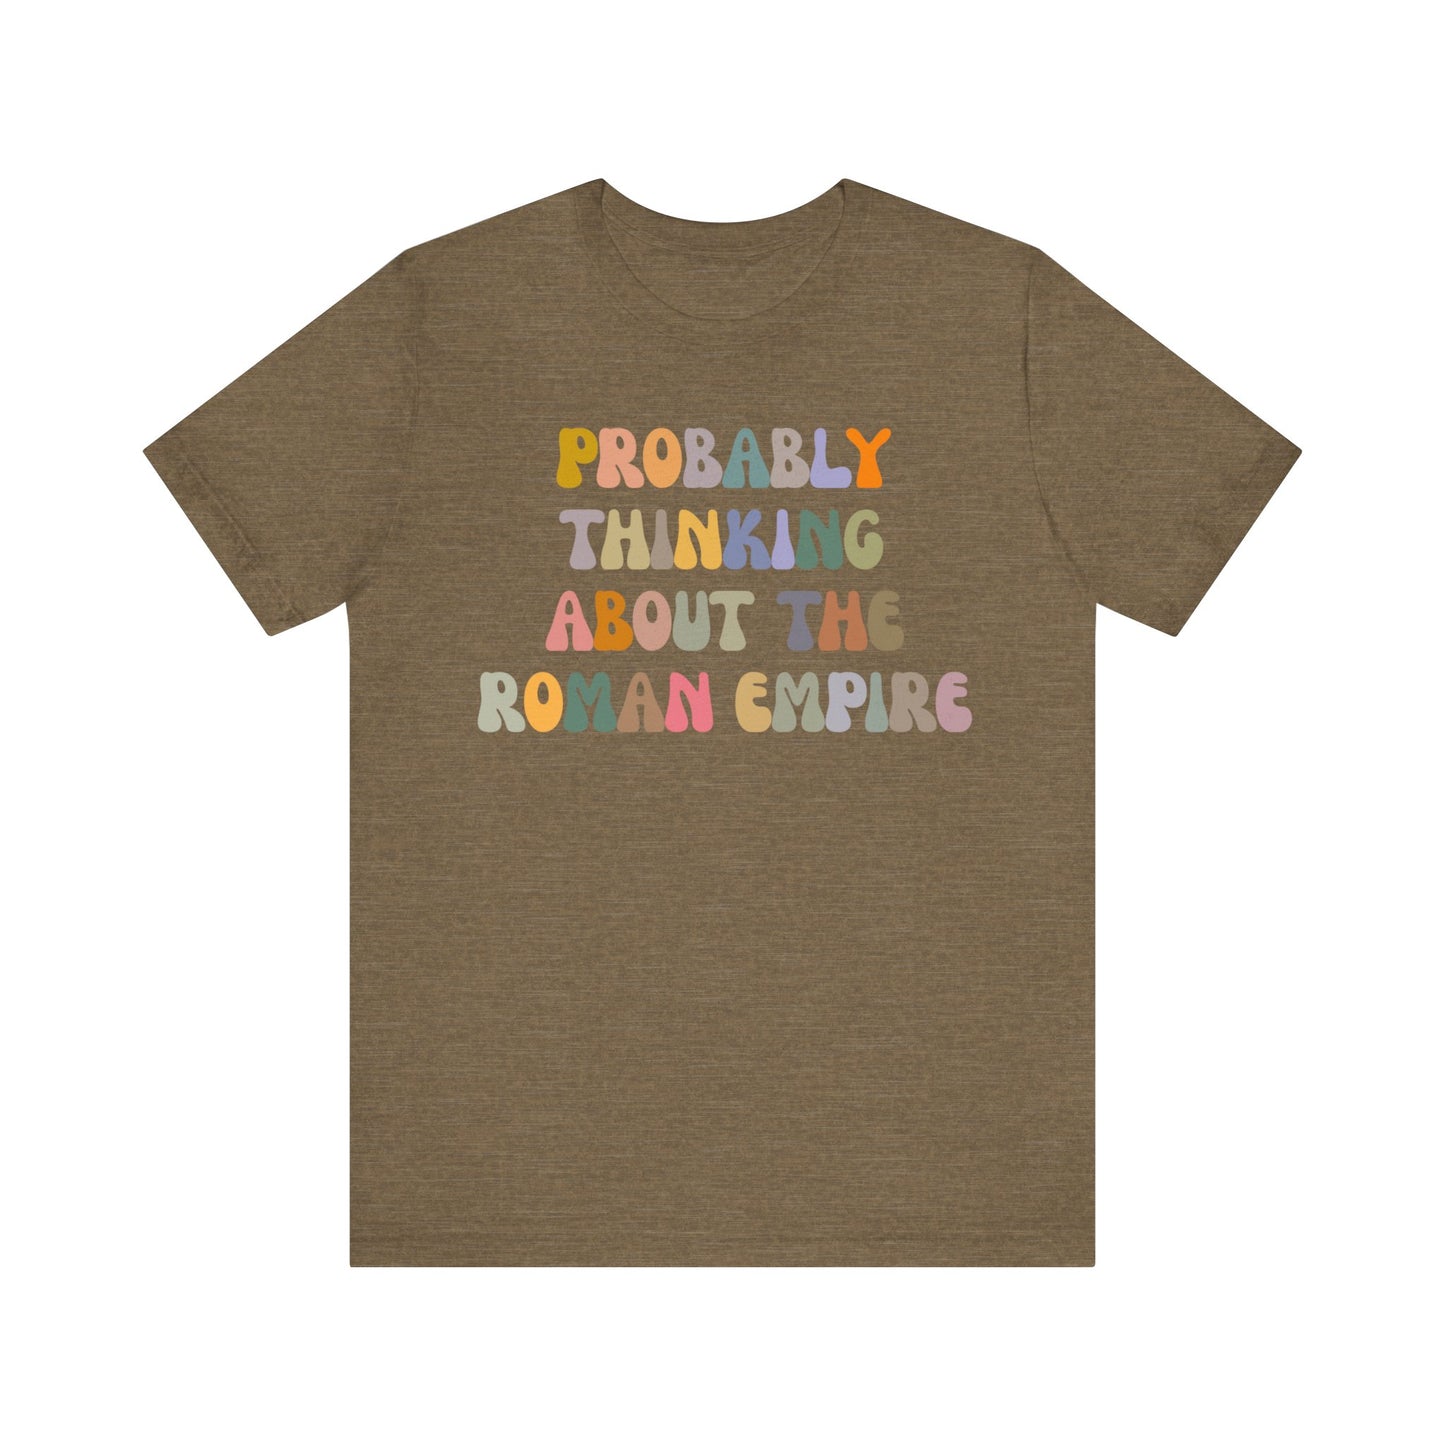 Probably Thinking About The Roman Empire Shirt, Funny Quote Shirt, Funny History Lover Shirt, Roman Empire Meme Shirt, Shirt for Mom, T1508